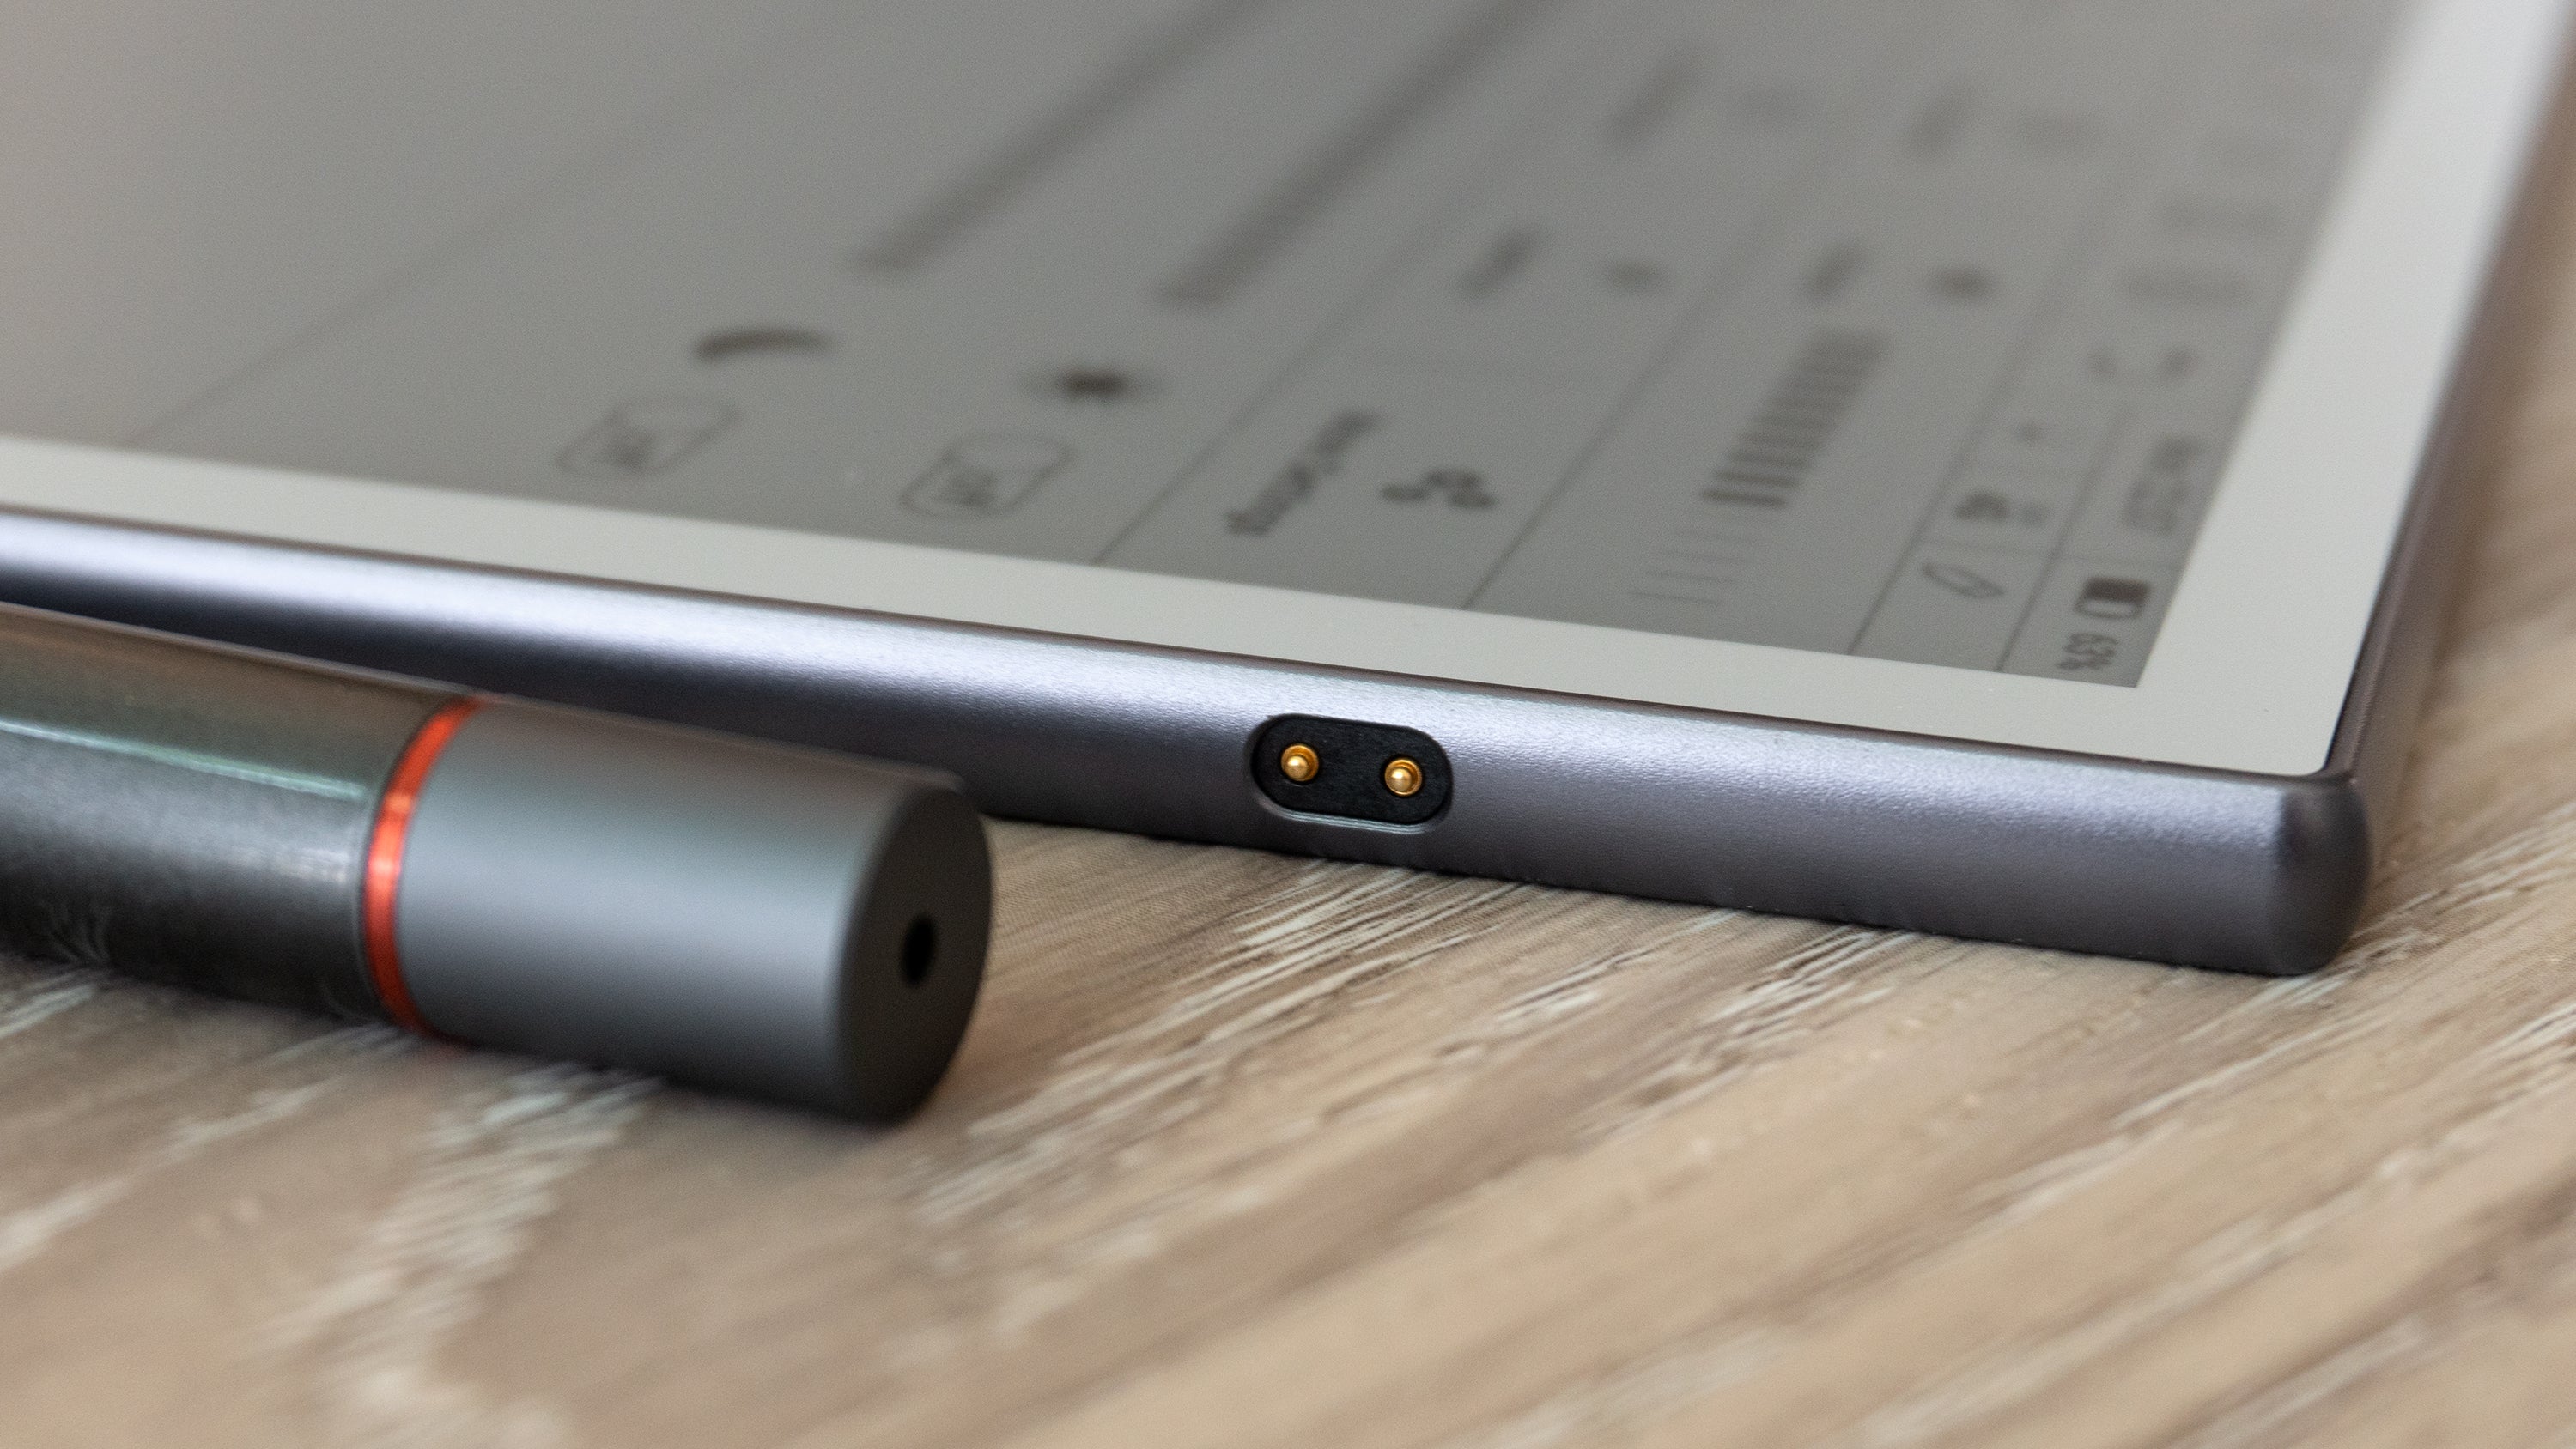 The A5 stylus' shortcut buttons rely on a Bluetooth connection, requiring the stylus to be charged by magnetically docking it to the edge of the InkNote Colour. (Photo: Andrew Liszewski | Gizmodo)